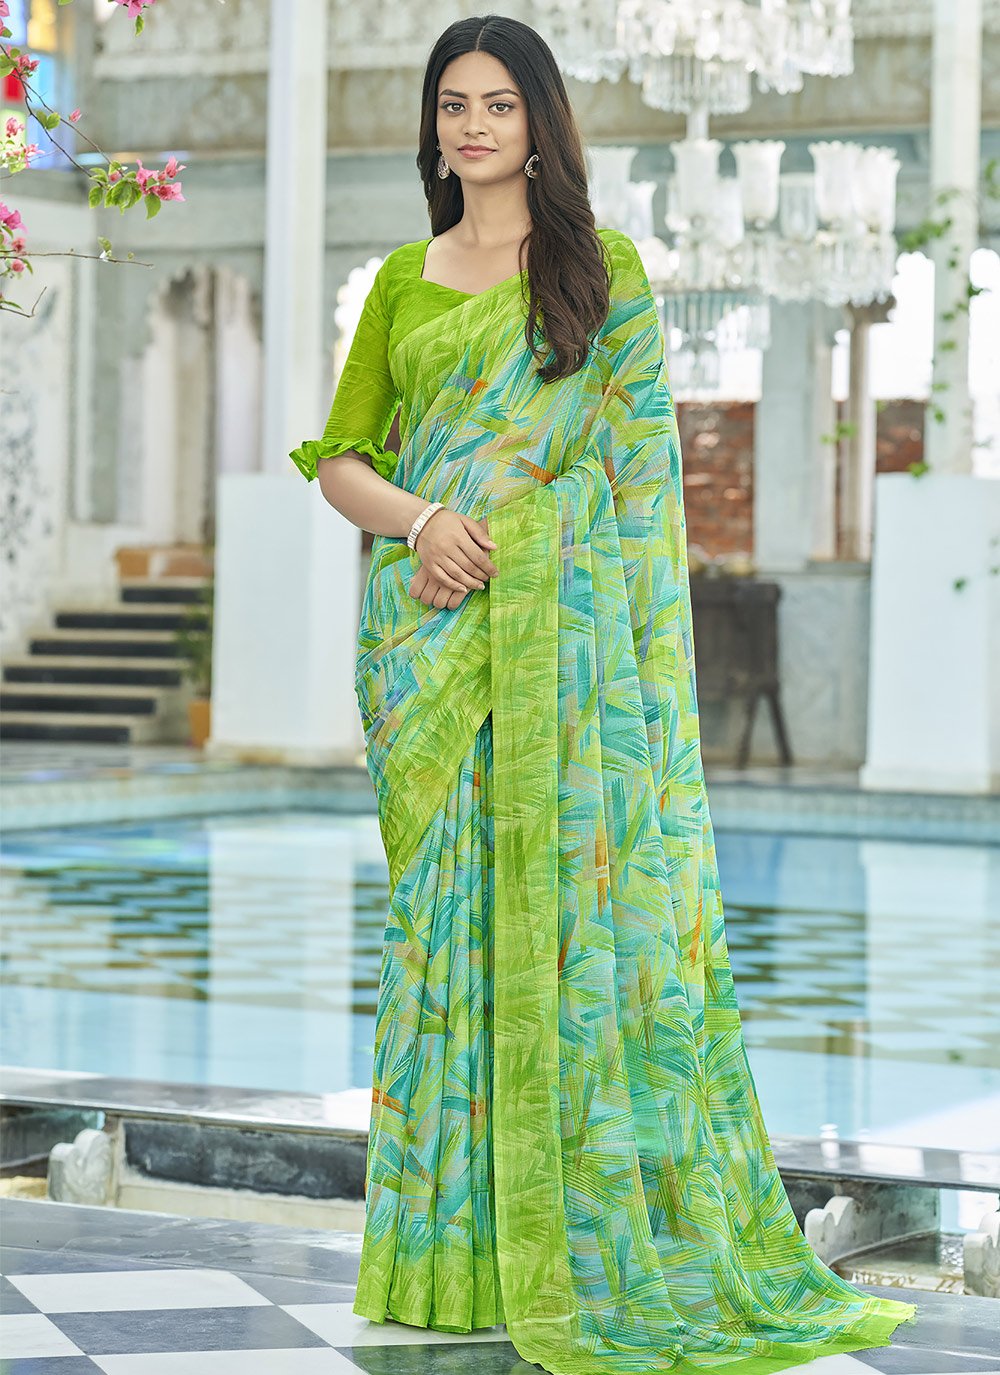 Faux Chiffon Digital Print Work Mint Green and Turquoise Designer Contemporary Saree